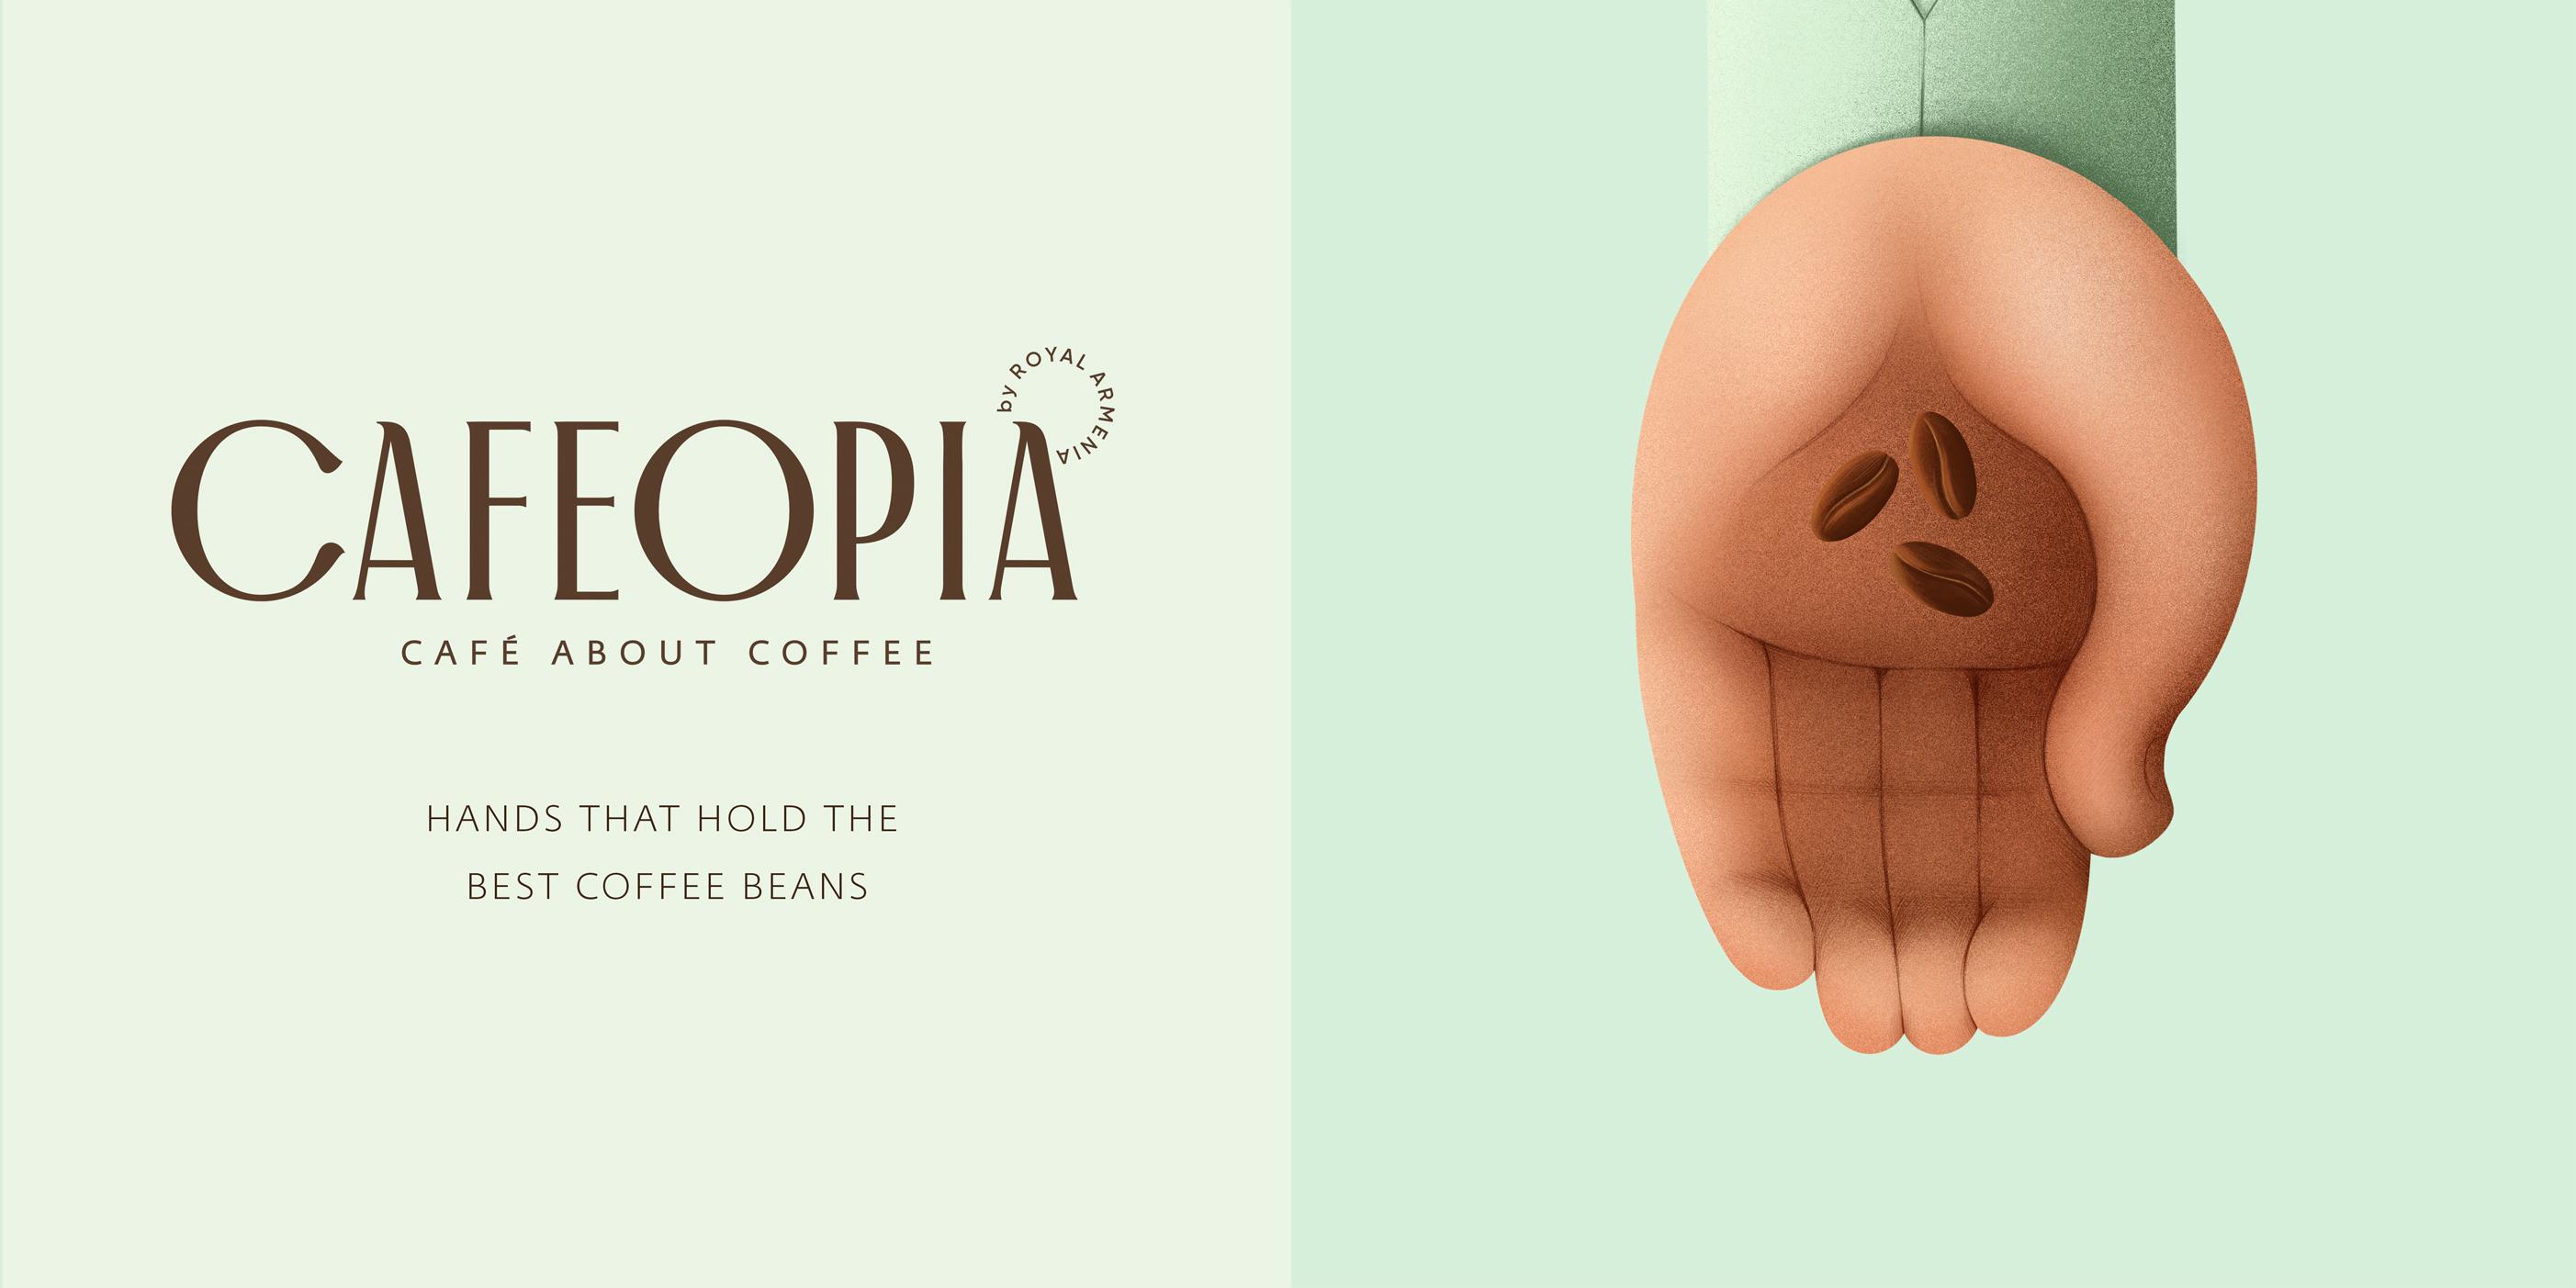 cafeopia_01_02